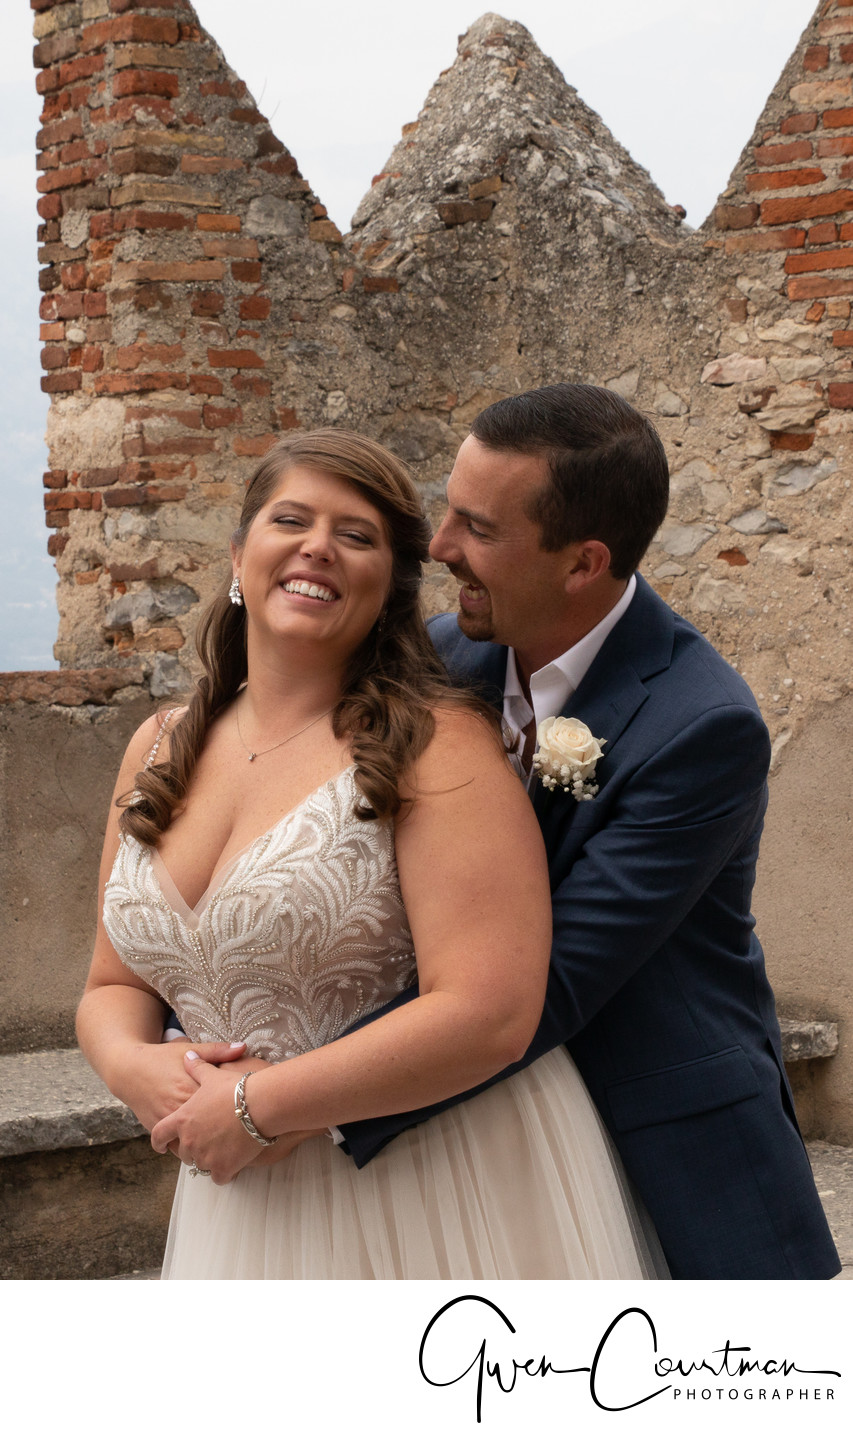 Kirsten and Justin, turrets in Malcesine Castle, Italy 